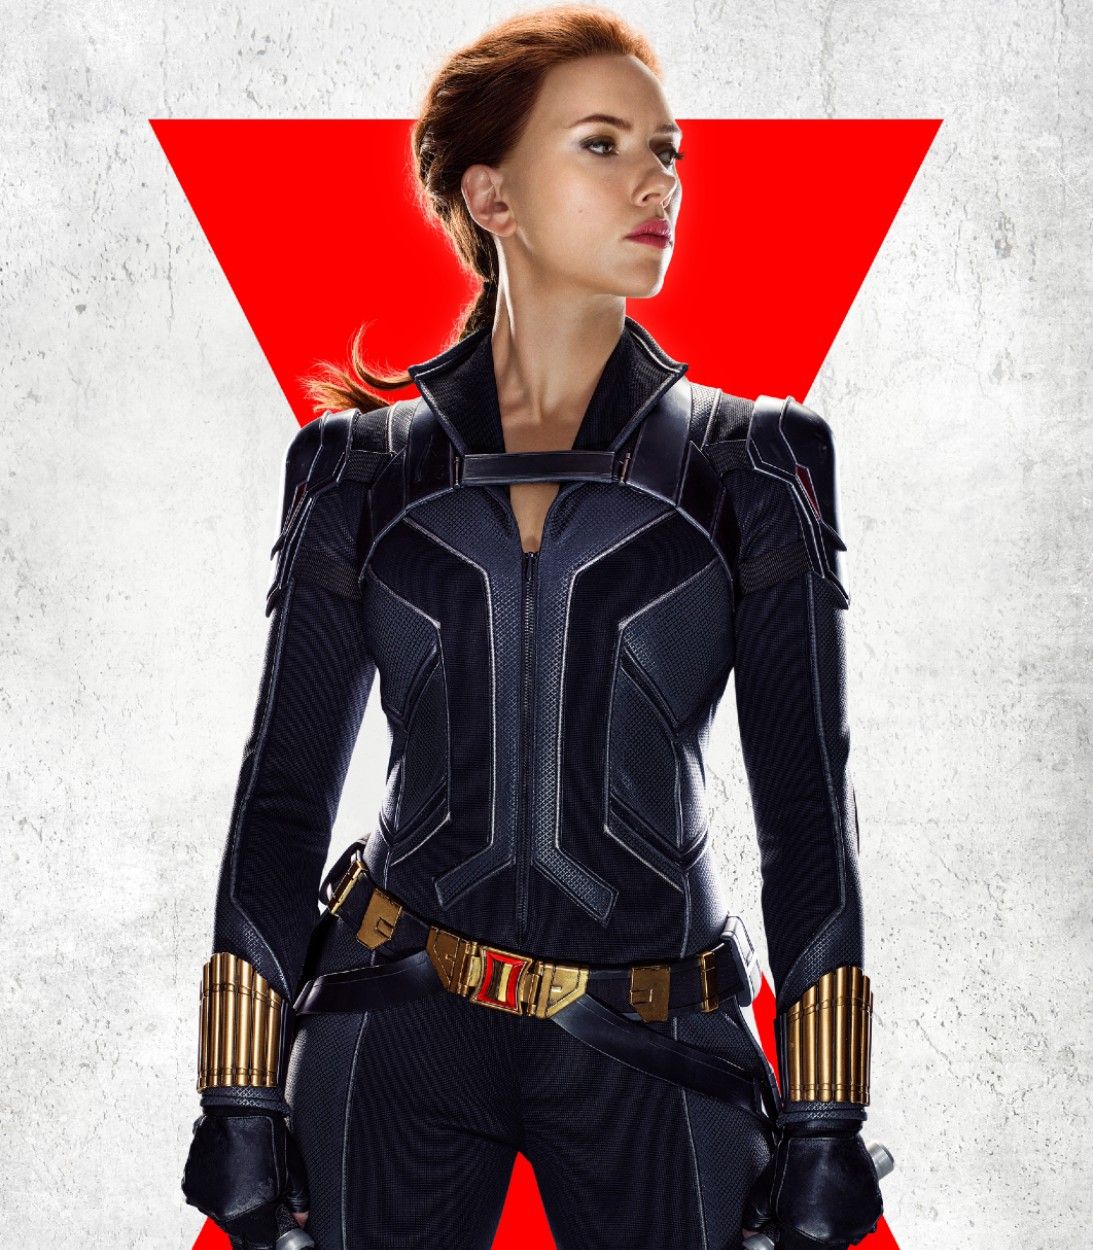 black widow character posters vertical (1)